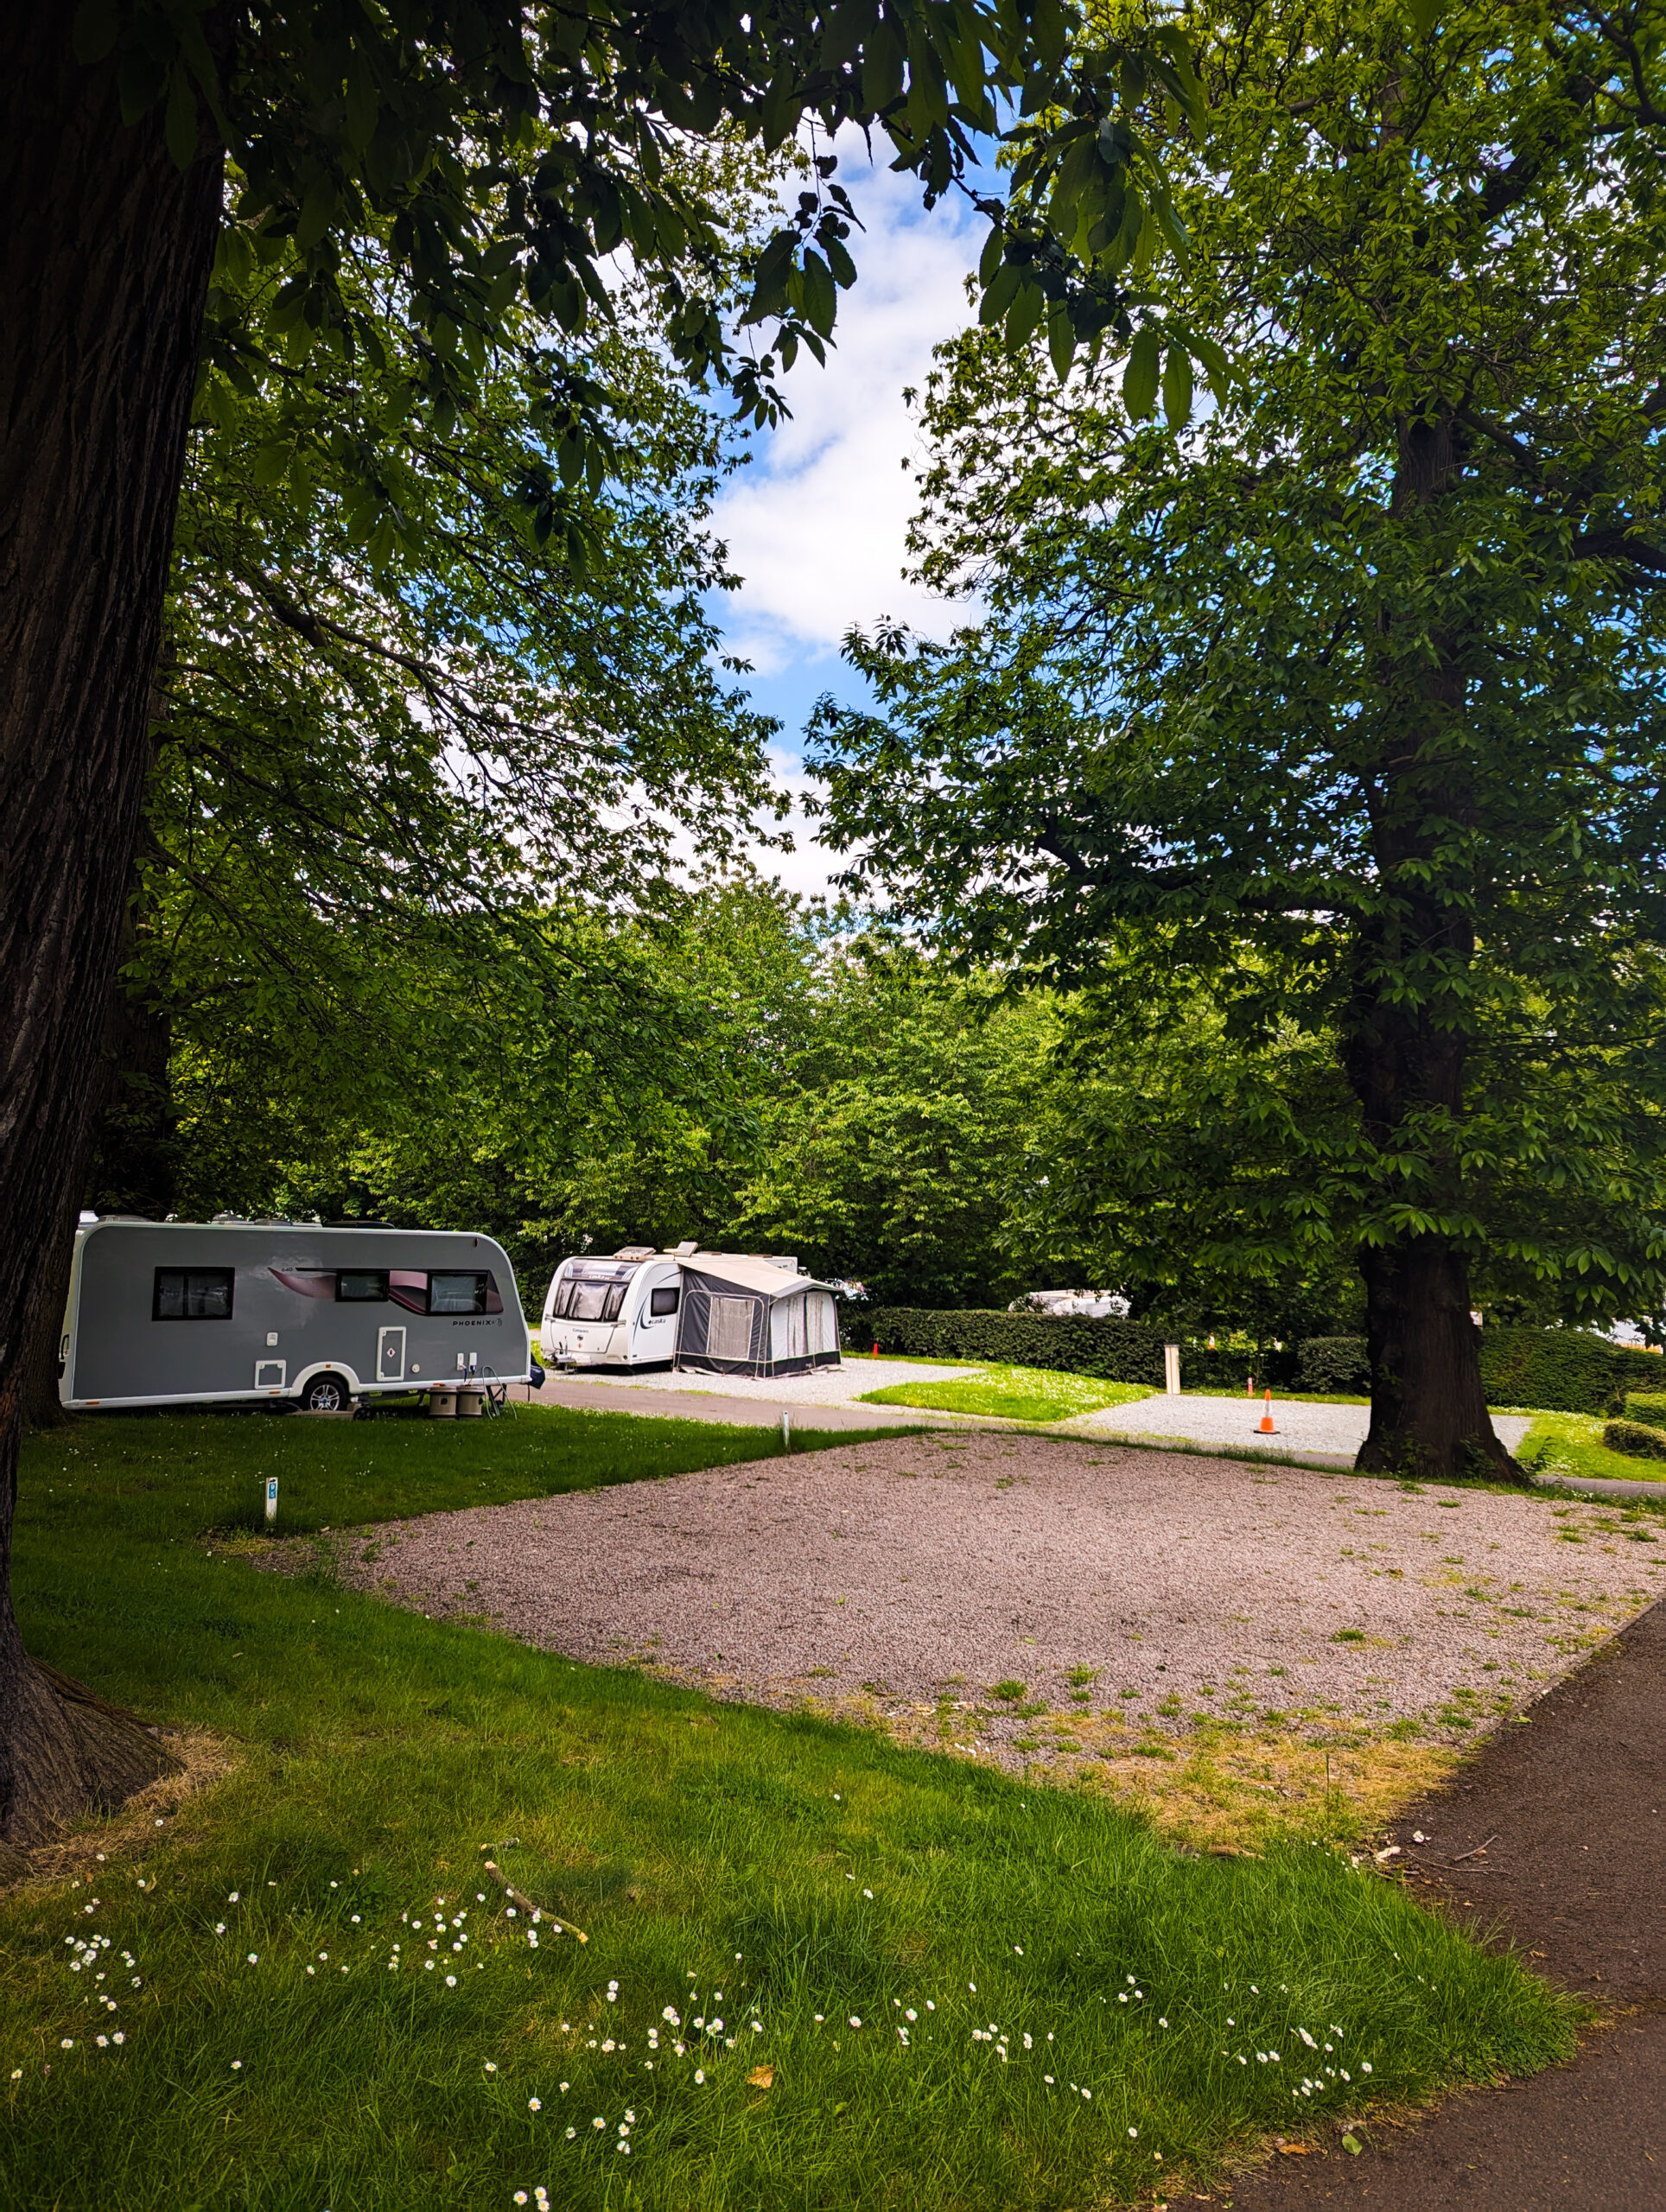 The Abbey Wood Campsite in London is a haven of green space